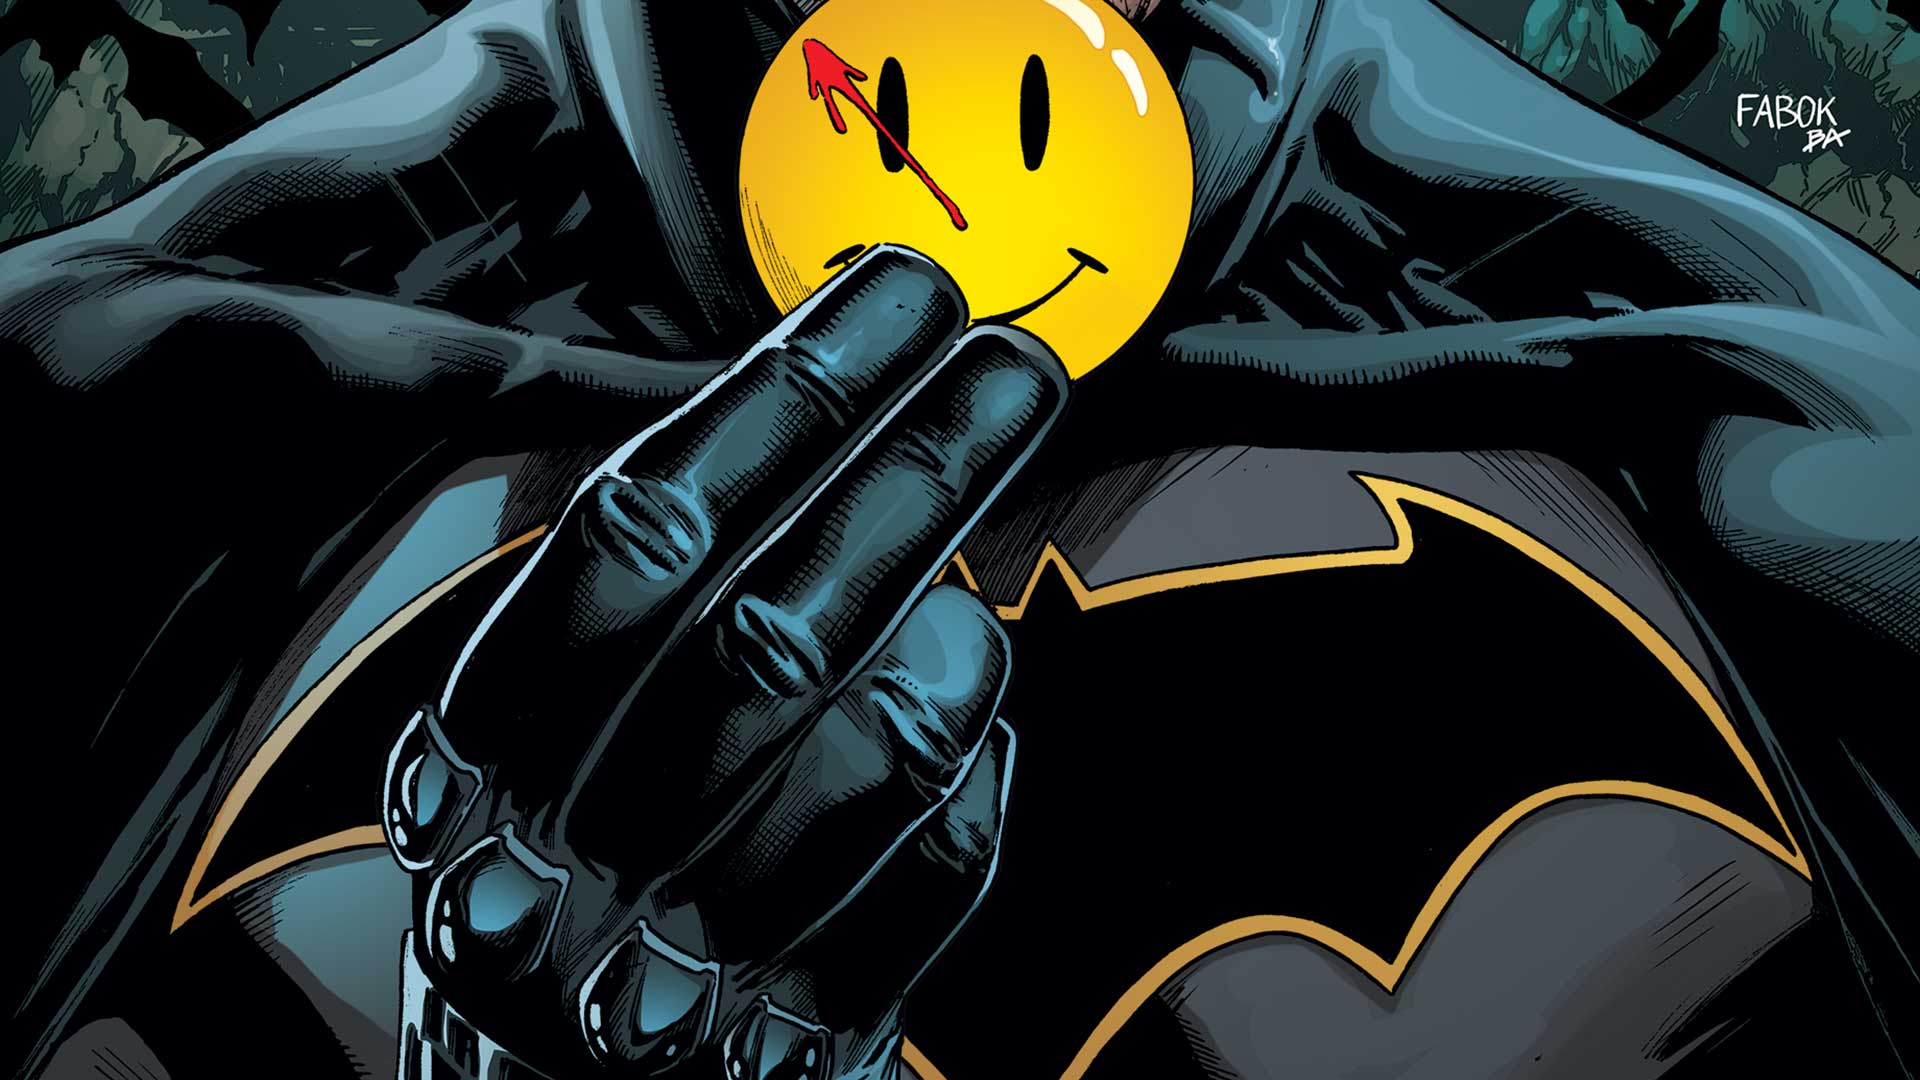 Batman: Issue 21, Batman is seen holding the iconic Watchmen button in a cover by artist Jason Fabok.